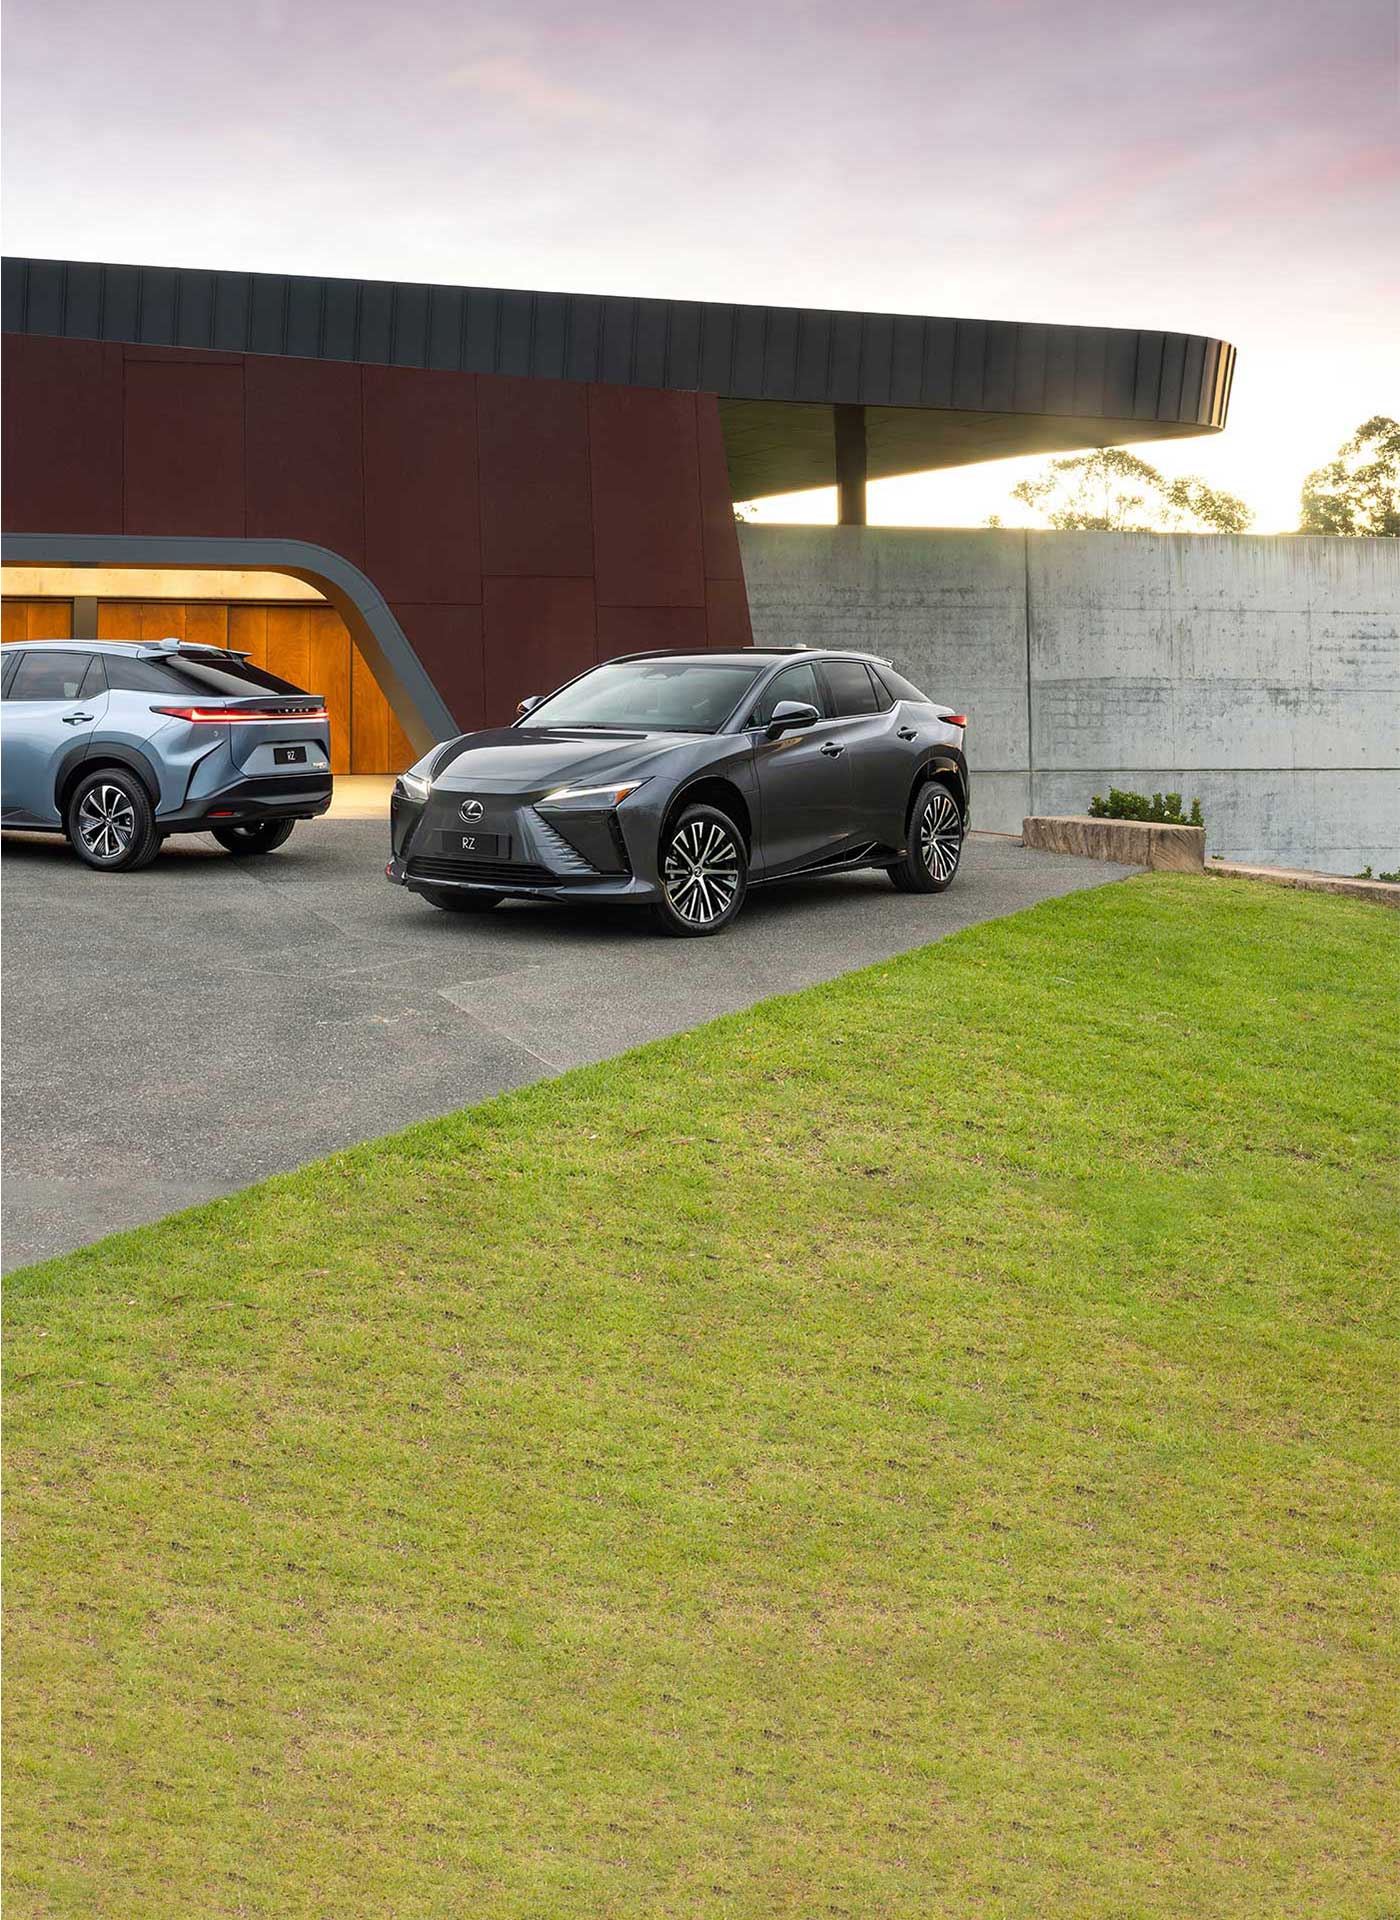 Two Lexus RZ All Electric vehicles are parked at the front of a luxury home